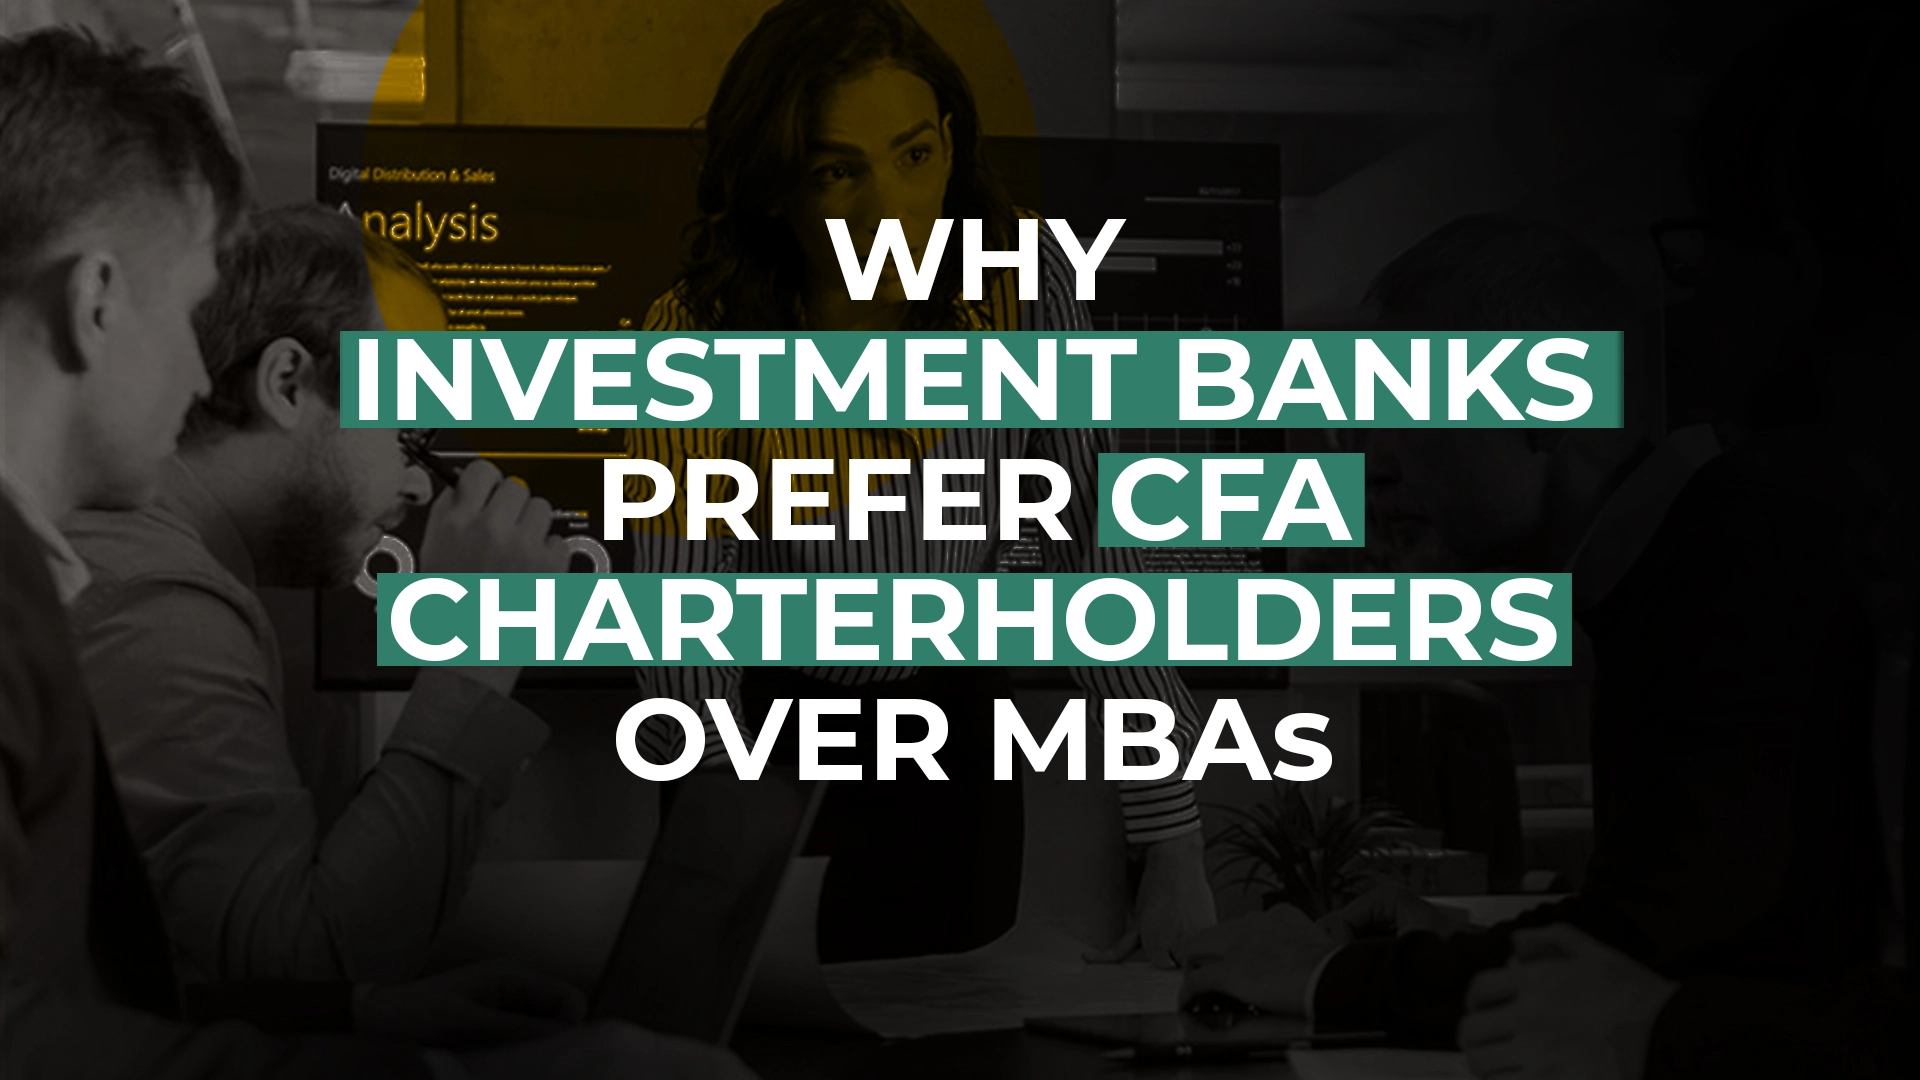 Why You Should Pursue CFA for Investment Banking Job & Not MBA